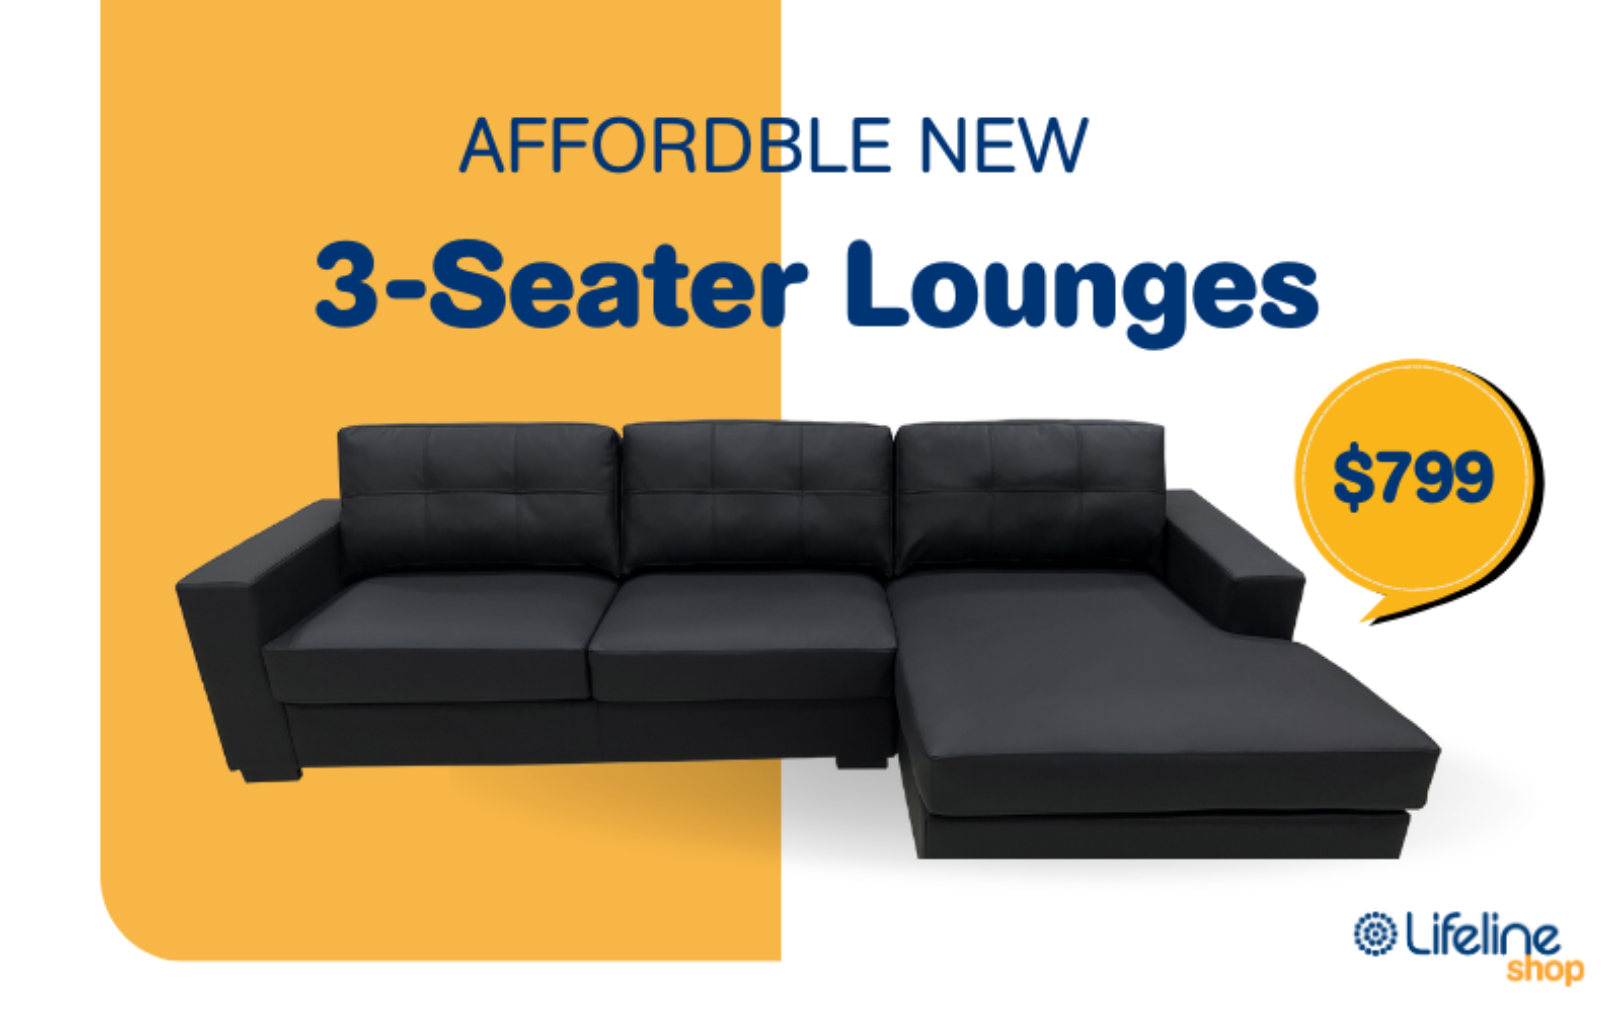 3 seater lounges